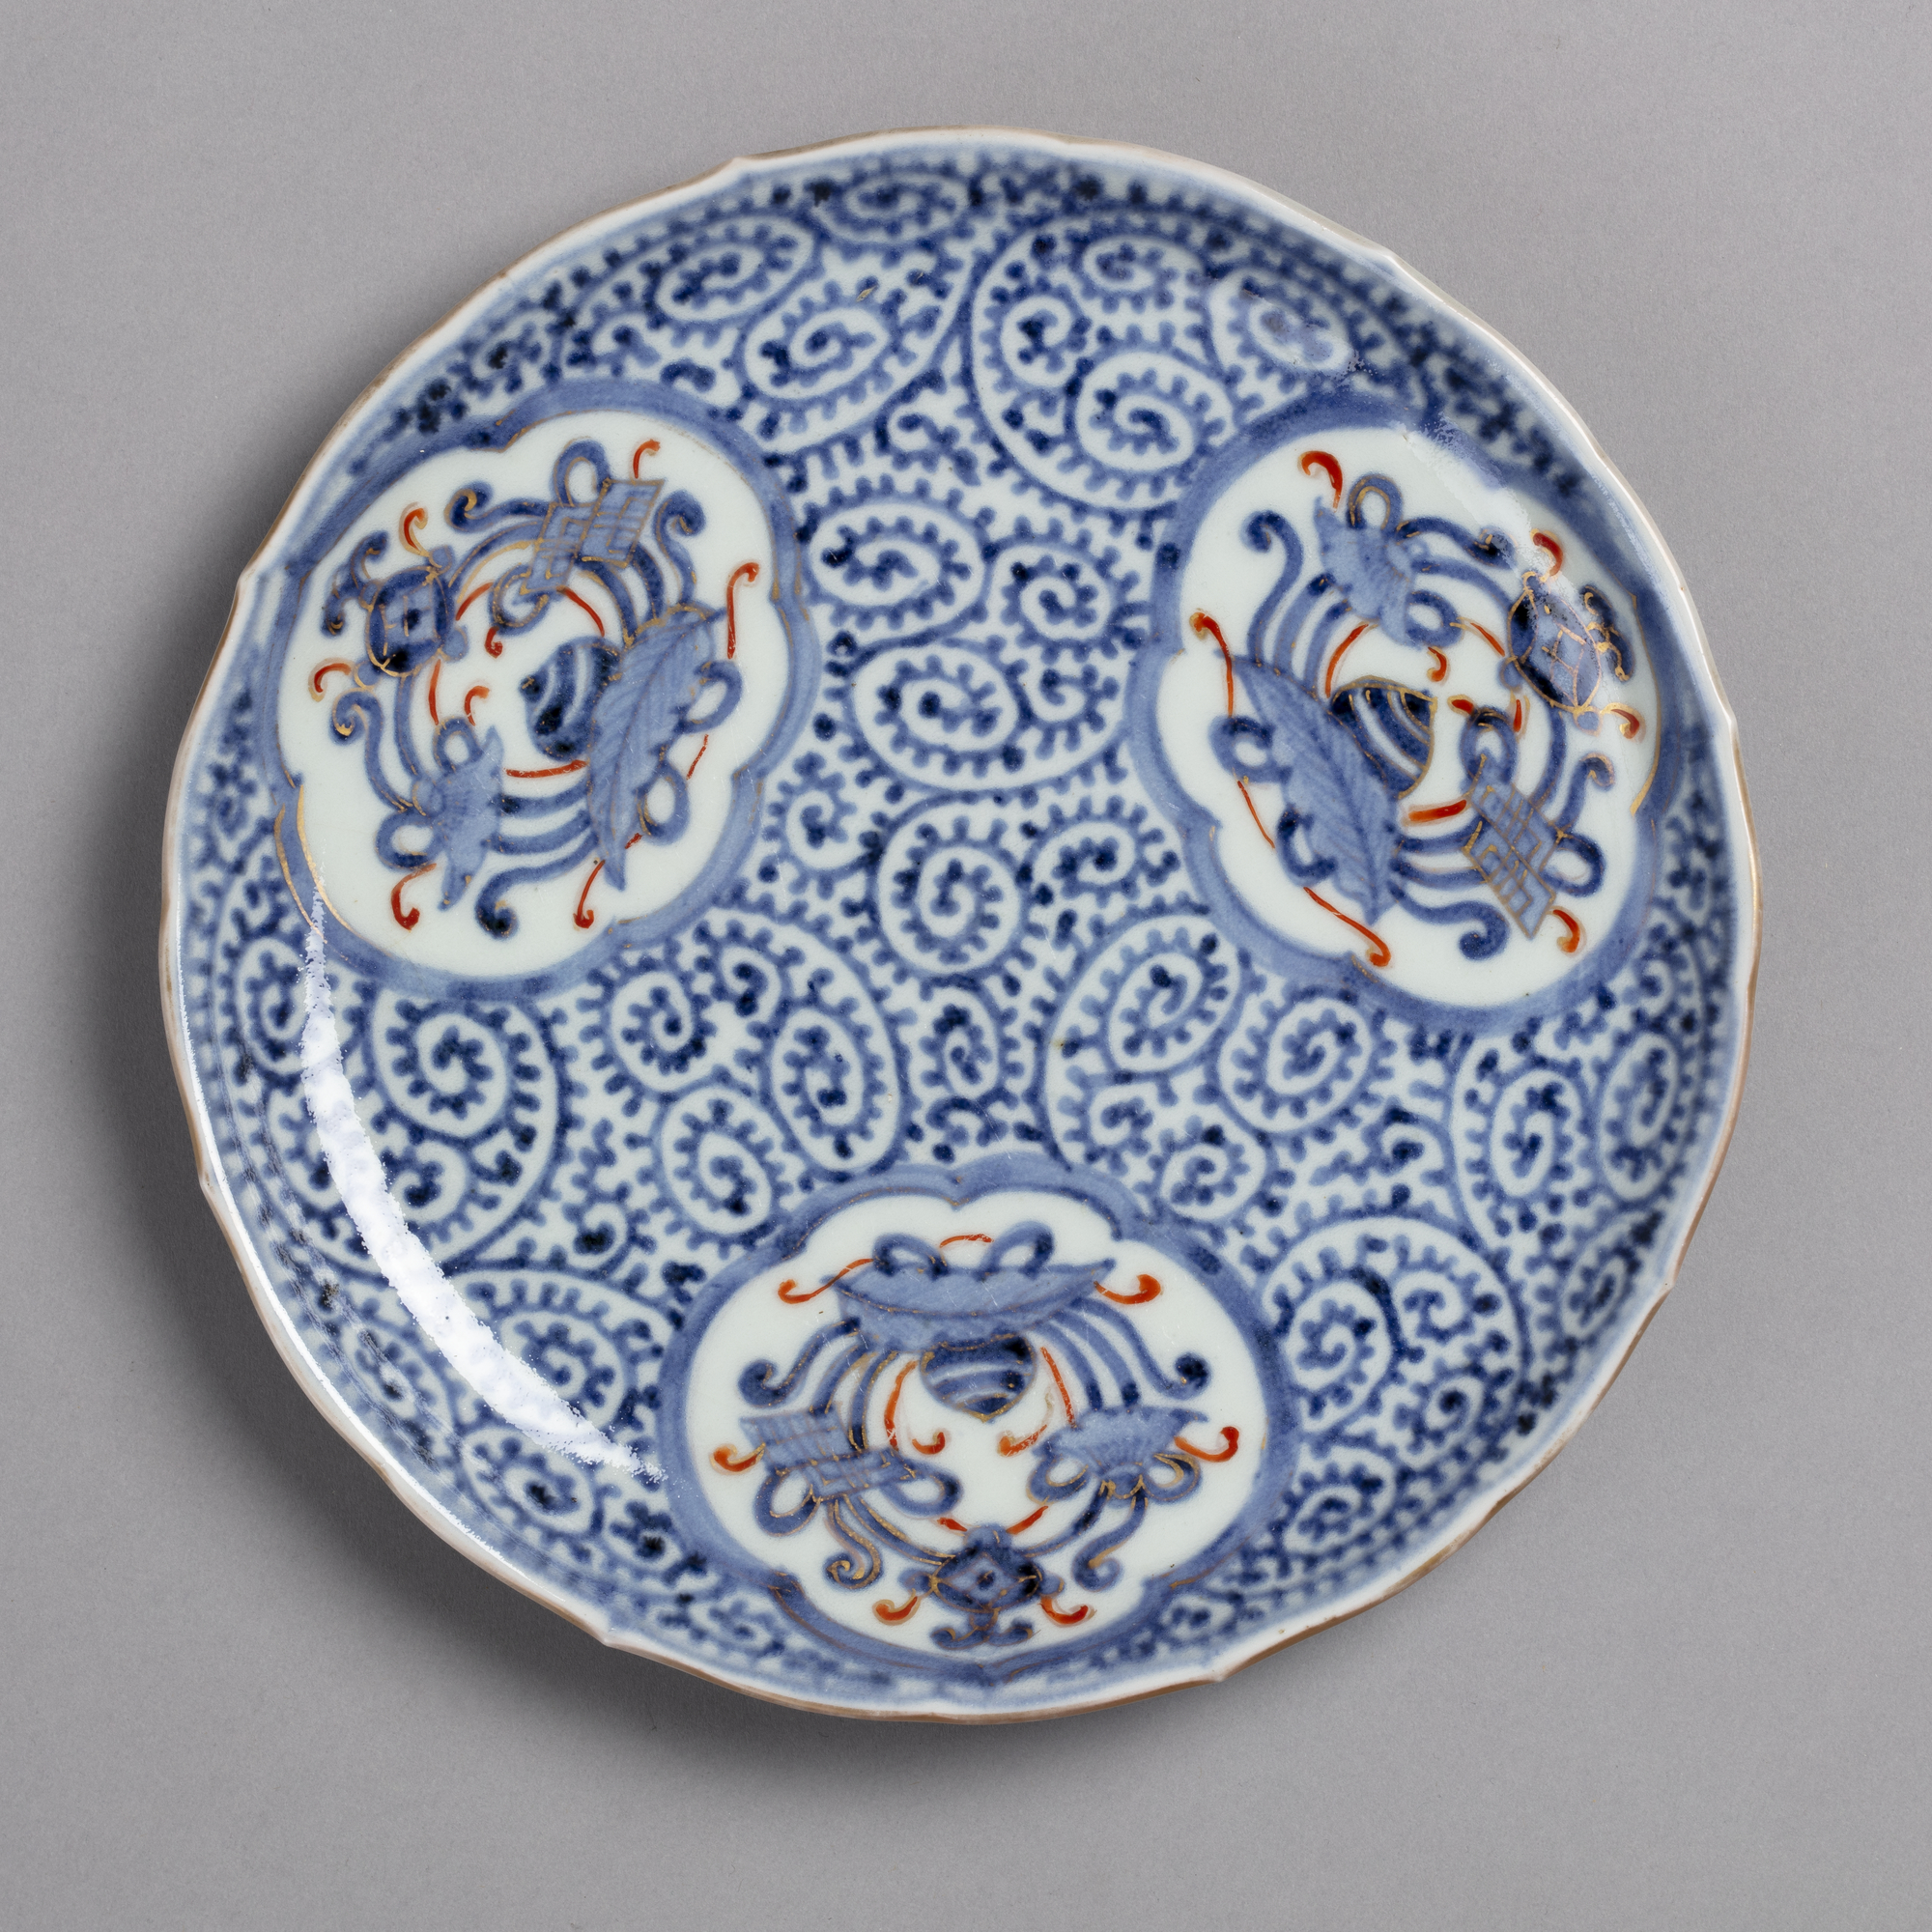 Dish with octopus scroll pattern in blue and orange on white